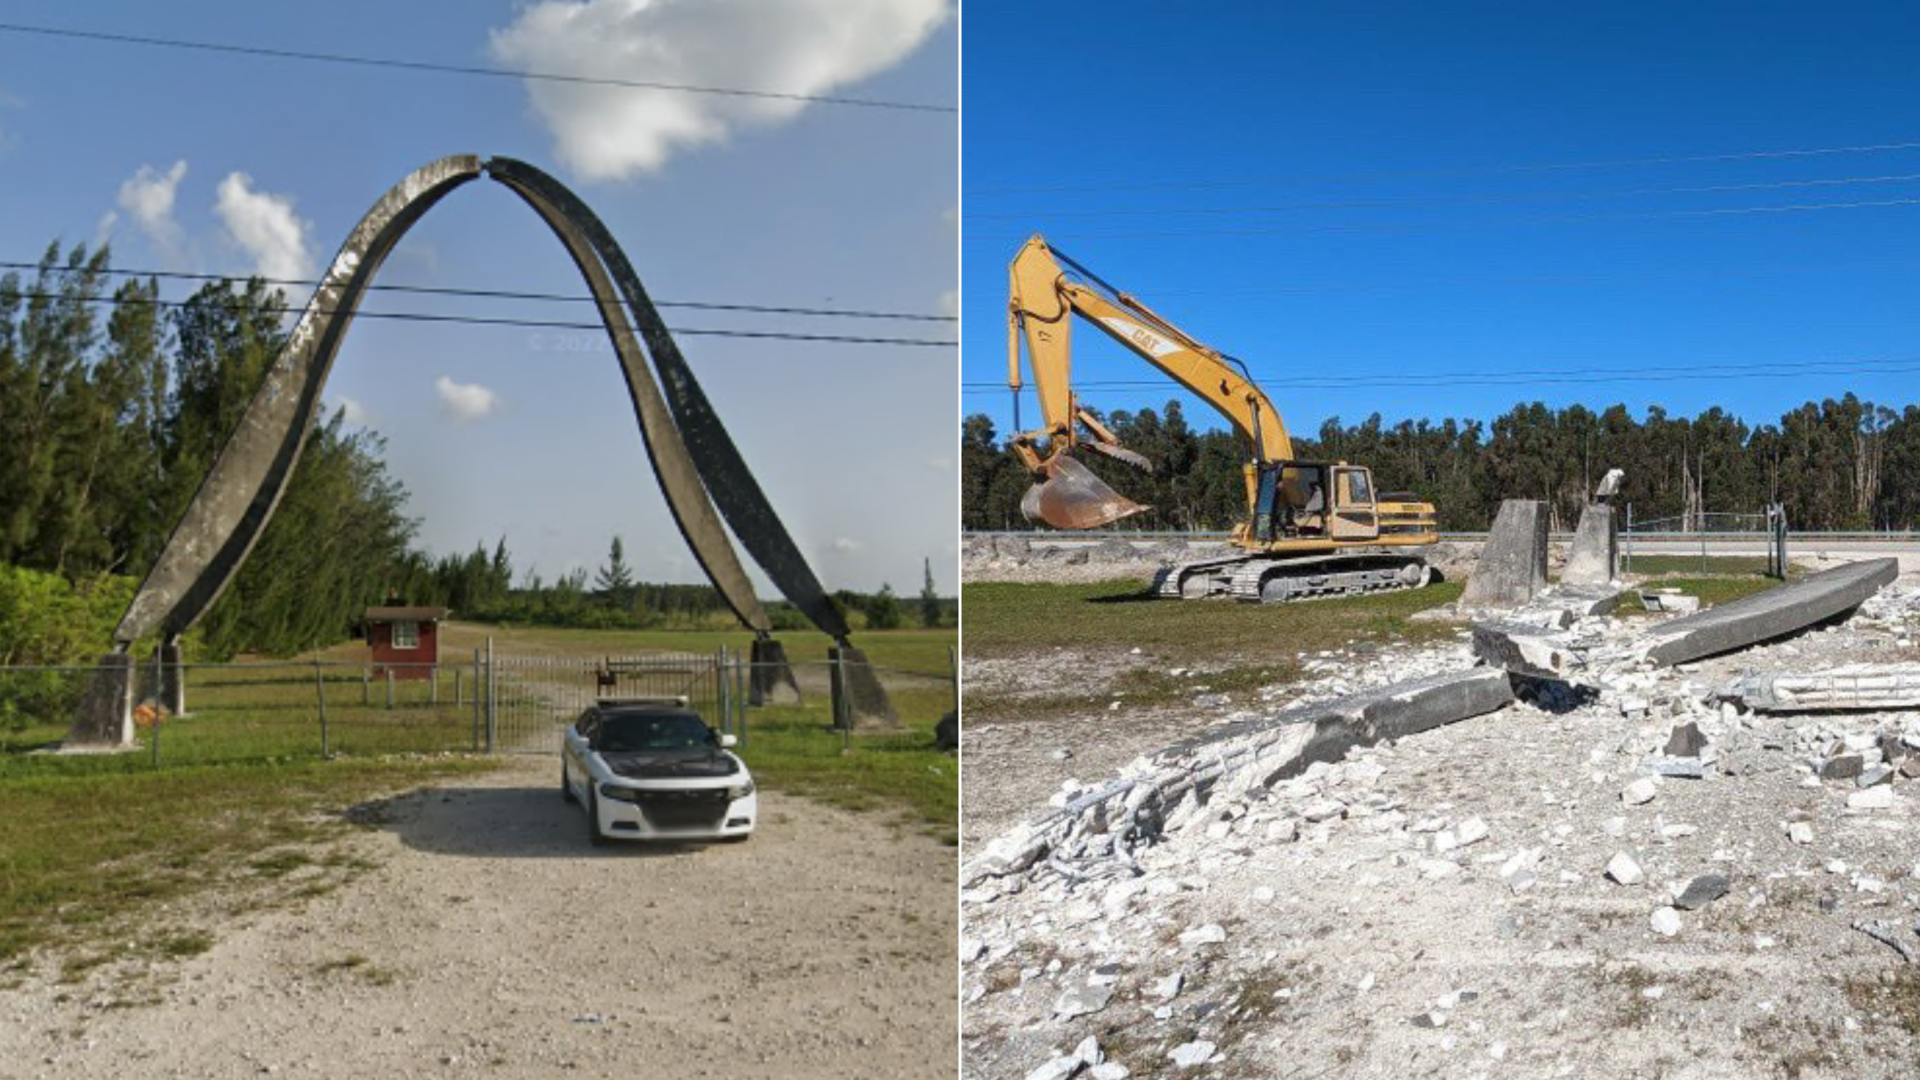 The Tamiami Trail arches are pictured before and after they were demolished.